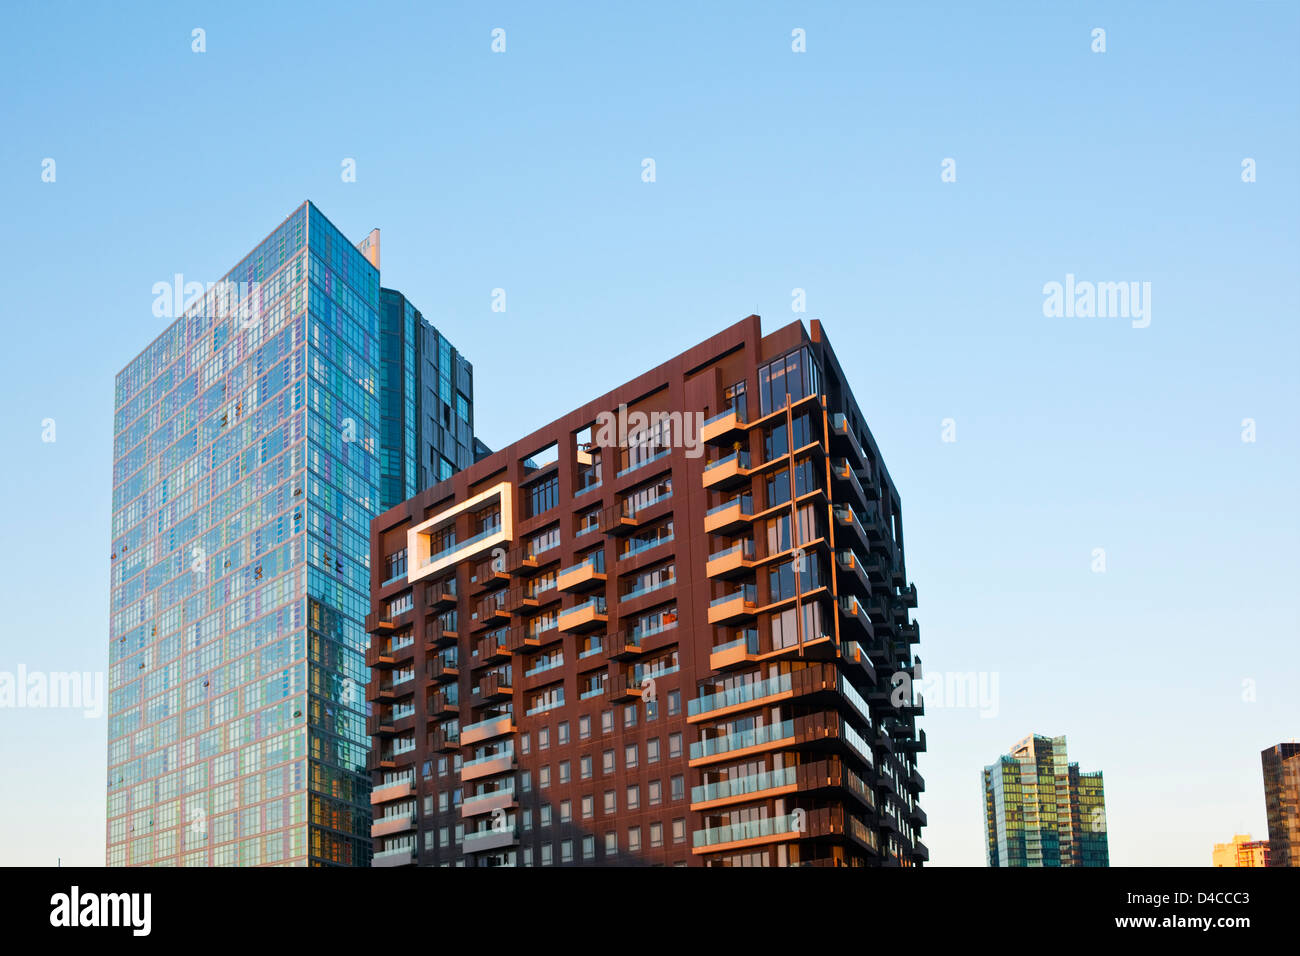 Inner city apartment block and office tower. Melbourne, Victoria, Australia Stock Photo